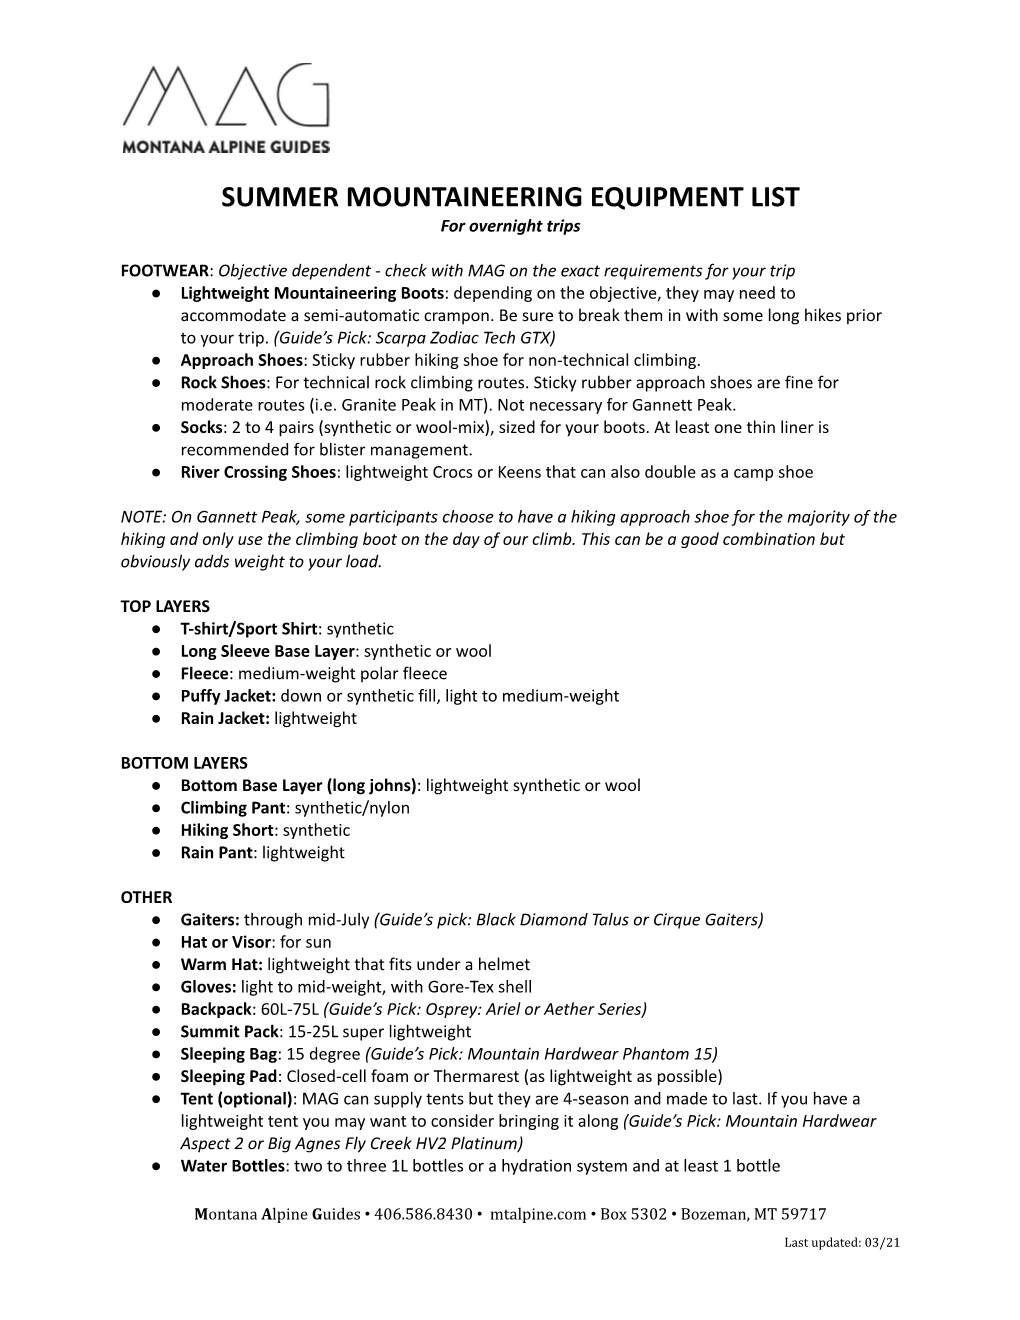 SUMMER MOUNTAINEERING EQUIPMENT LIST for Overnight Trips